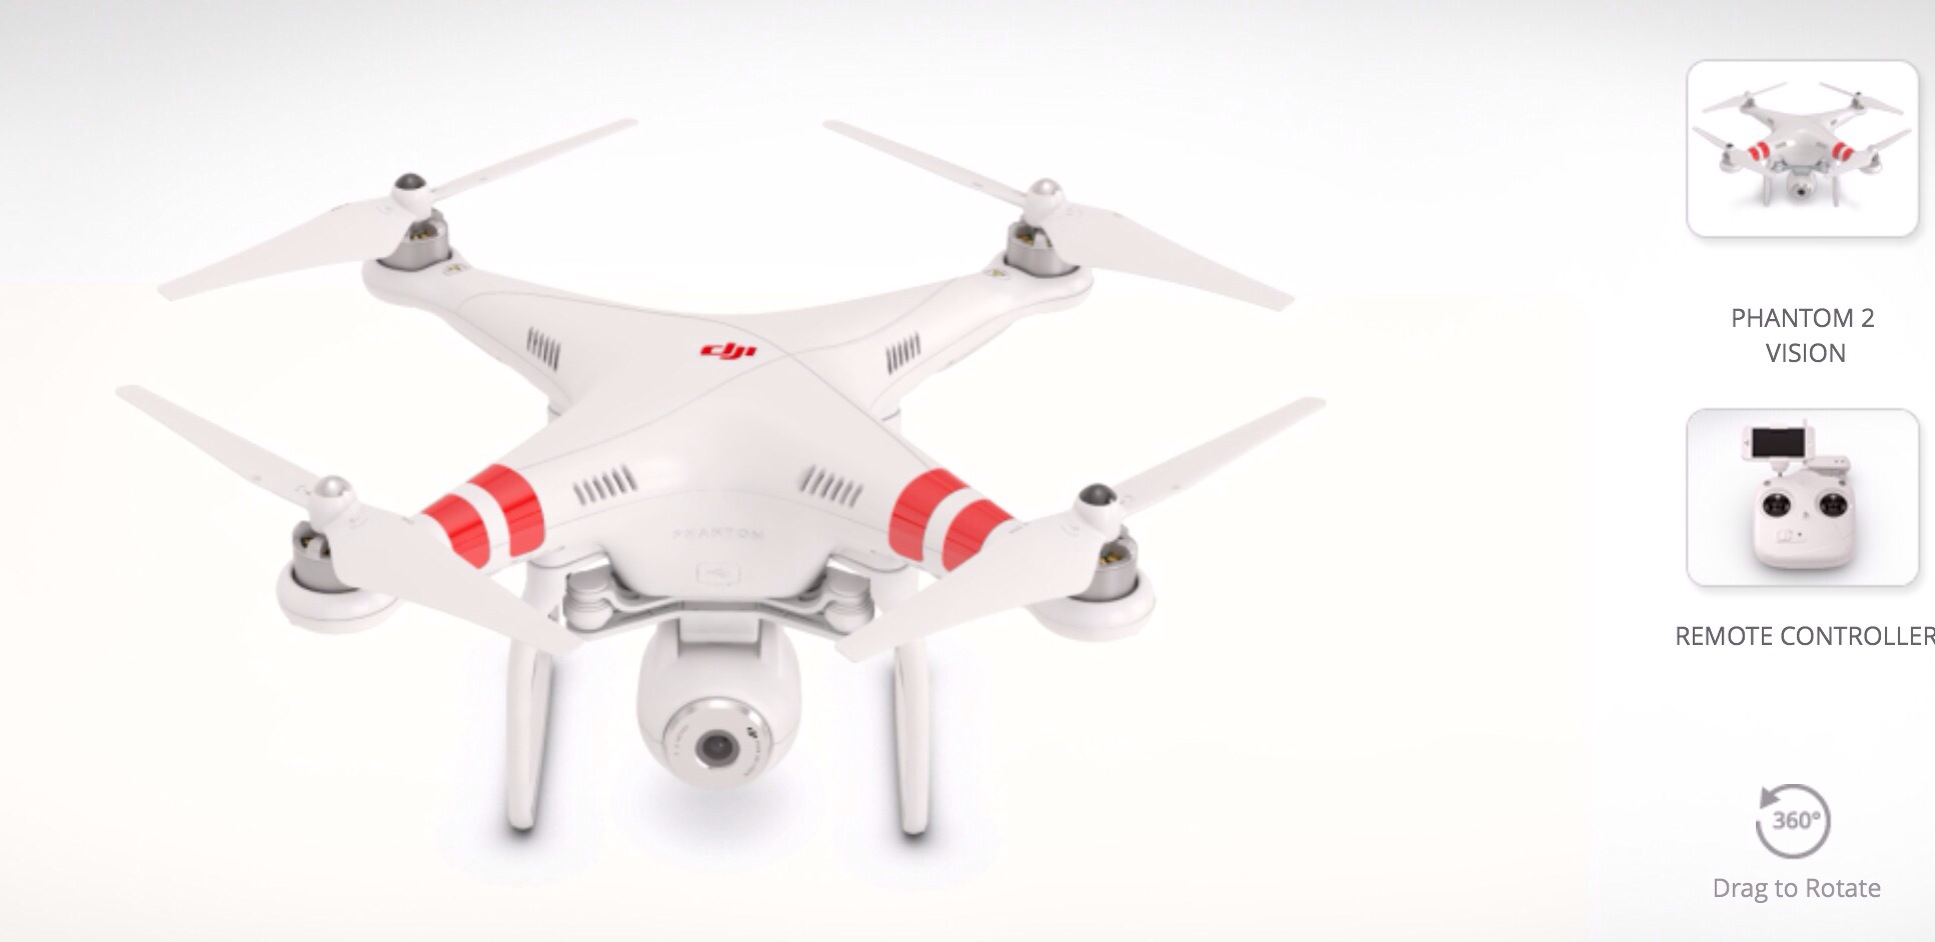 It’s a remote flying camera with great specifications -